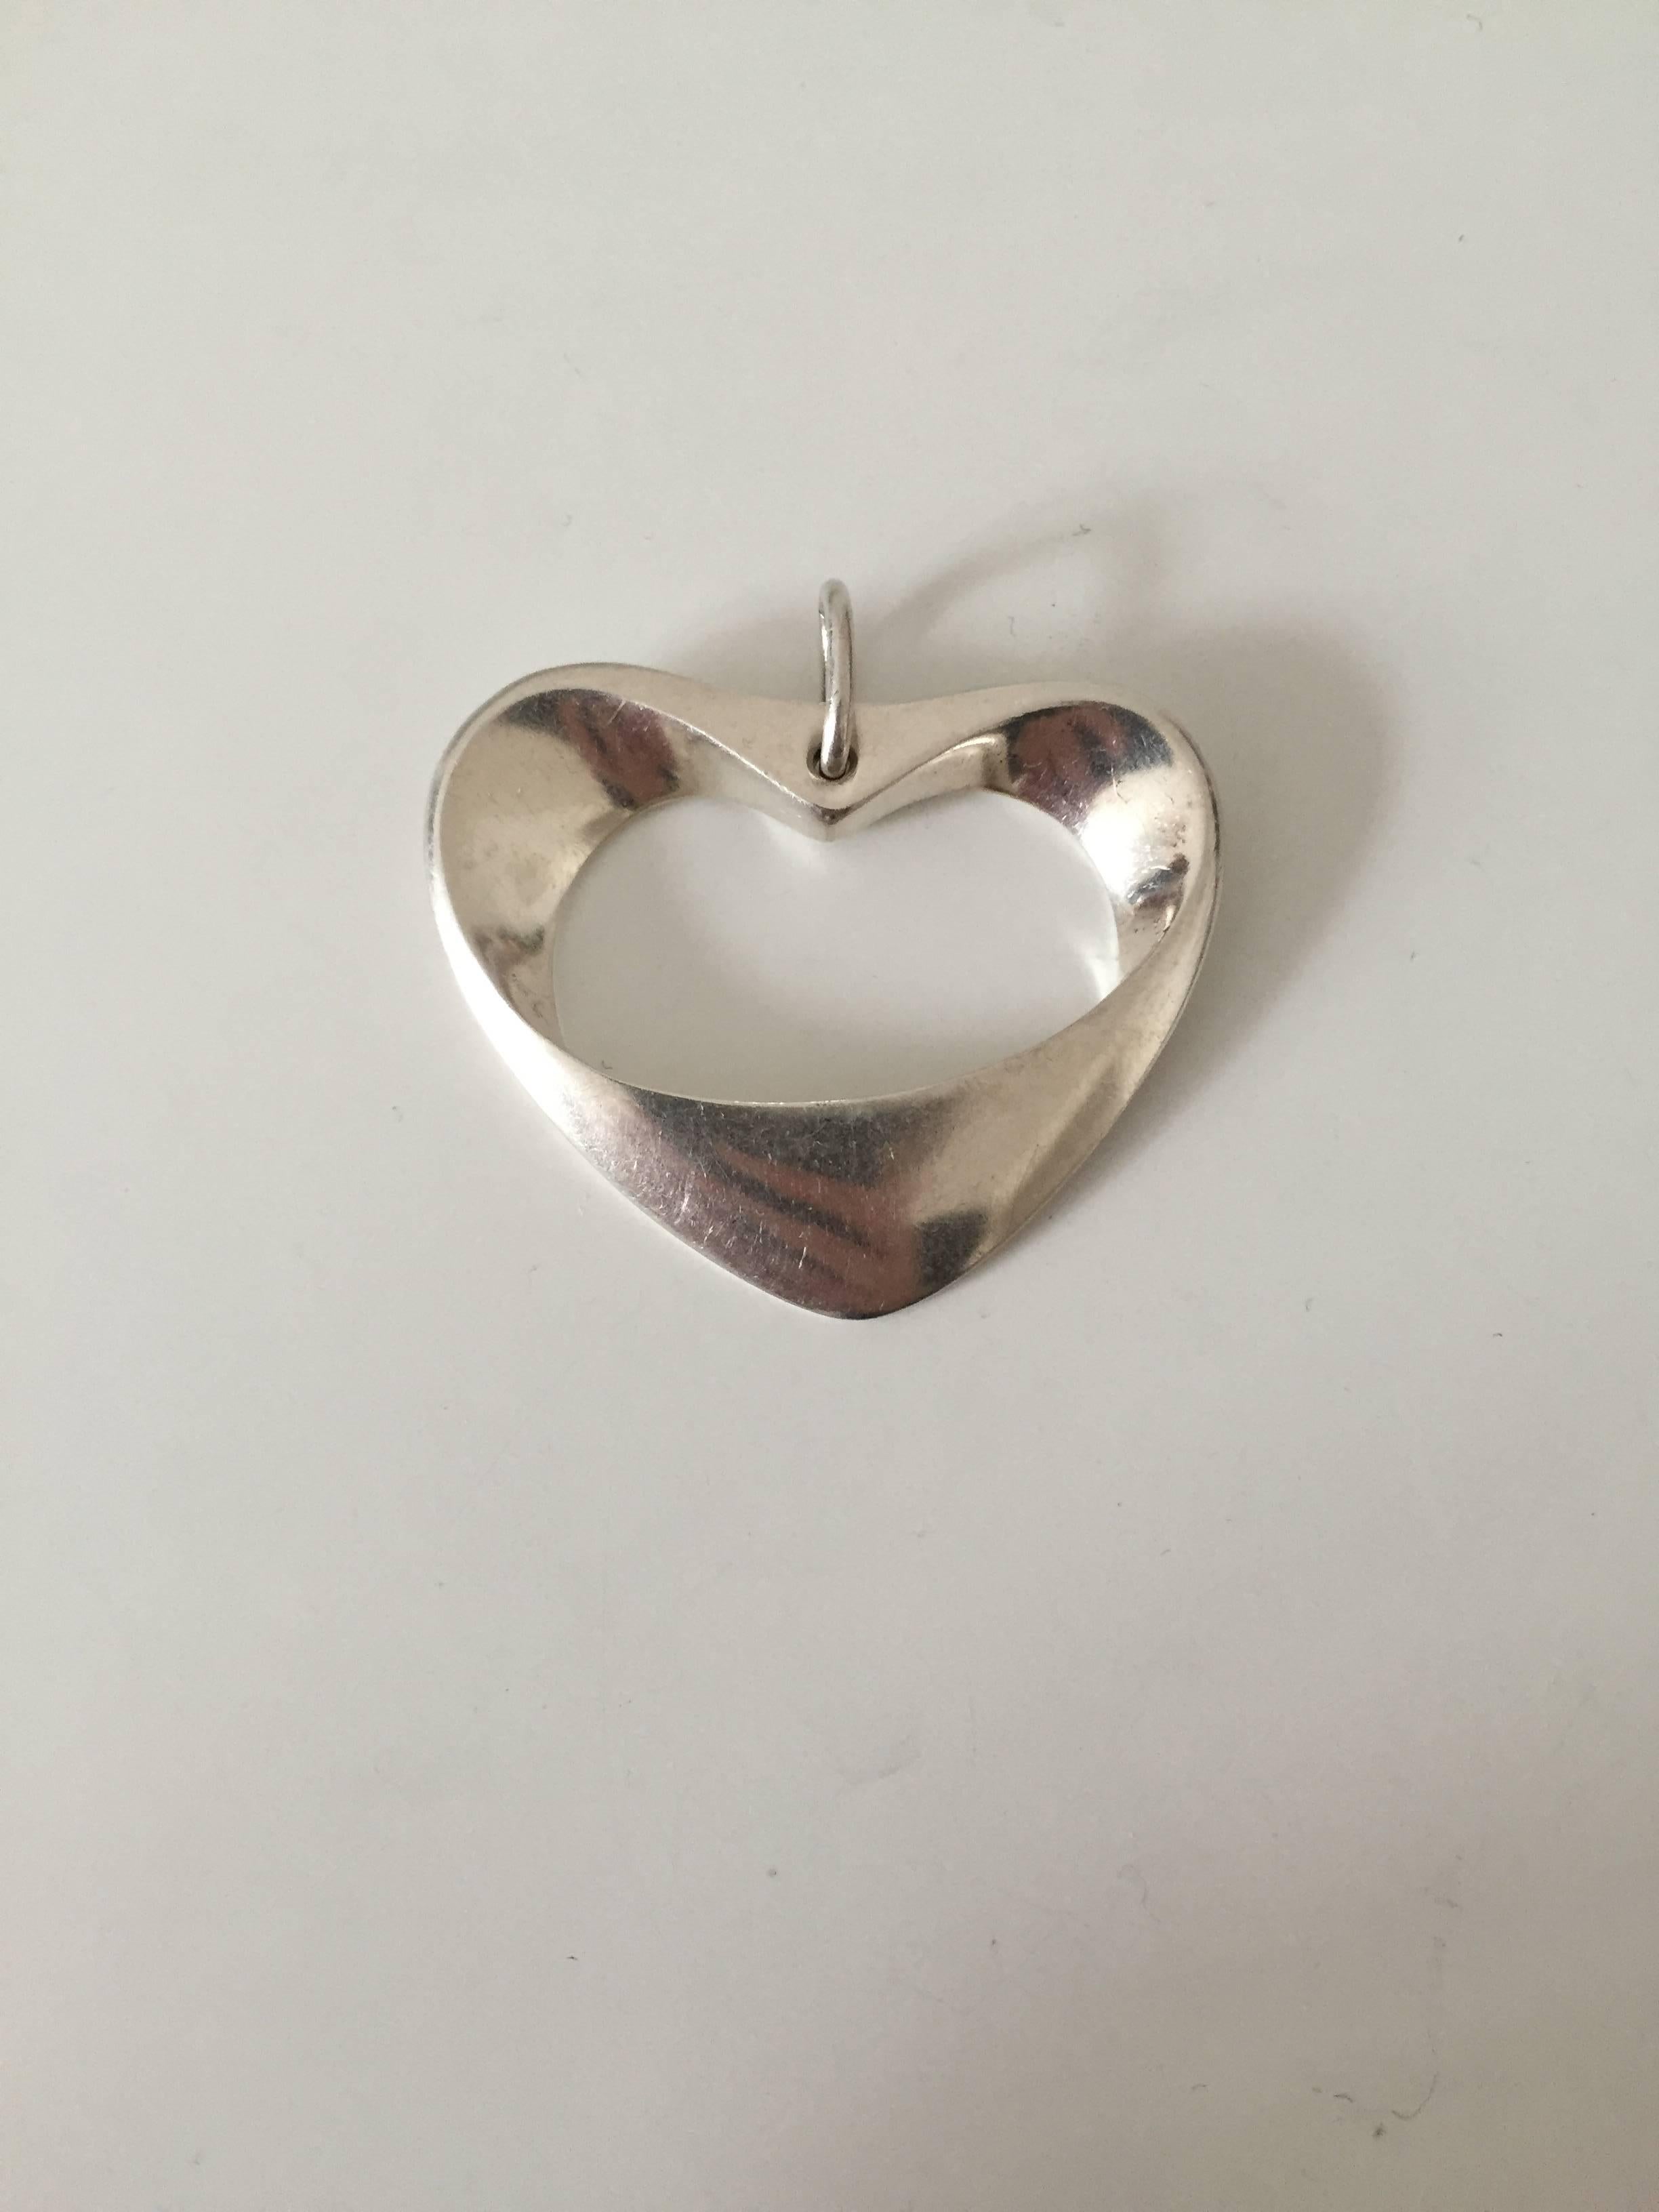 Large Georg Jensen sterling silver heart pendant #152. 

Measures 5 cm x 4 cm.
Weighs 21.7 g/0.76 oz.

Georg Jensen (1866-1935) opened his small silver atelier in Copenhagen, Denmark in 1904. By 1935 the year of his death, he had received world